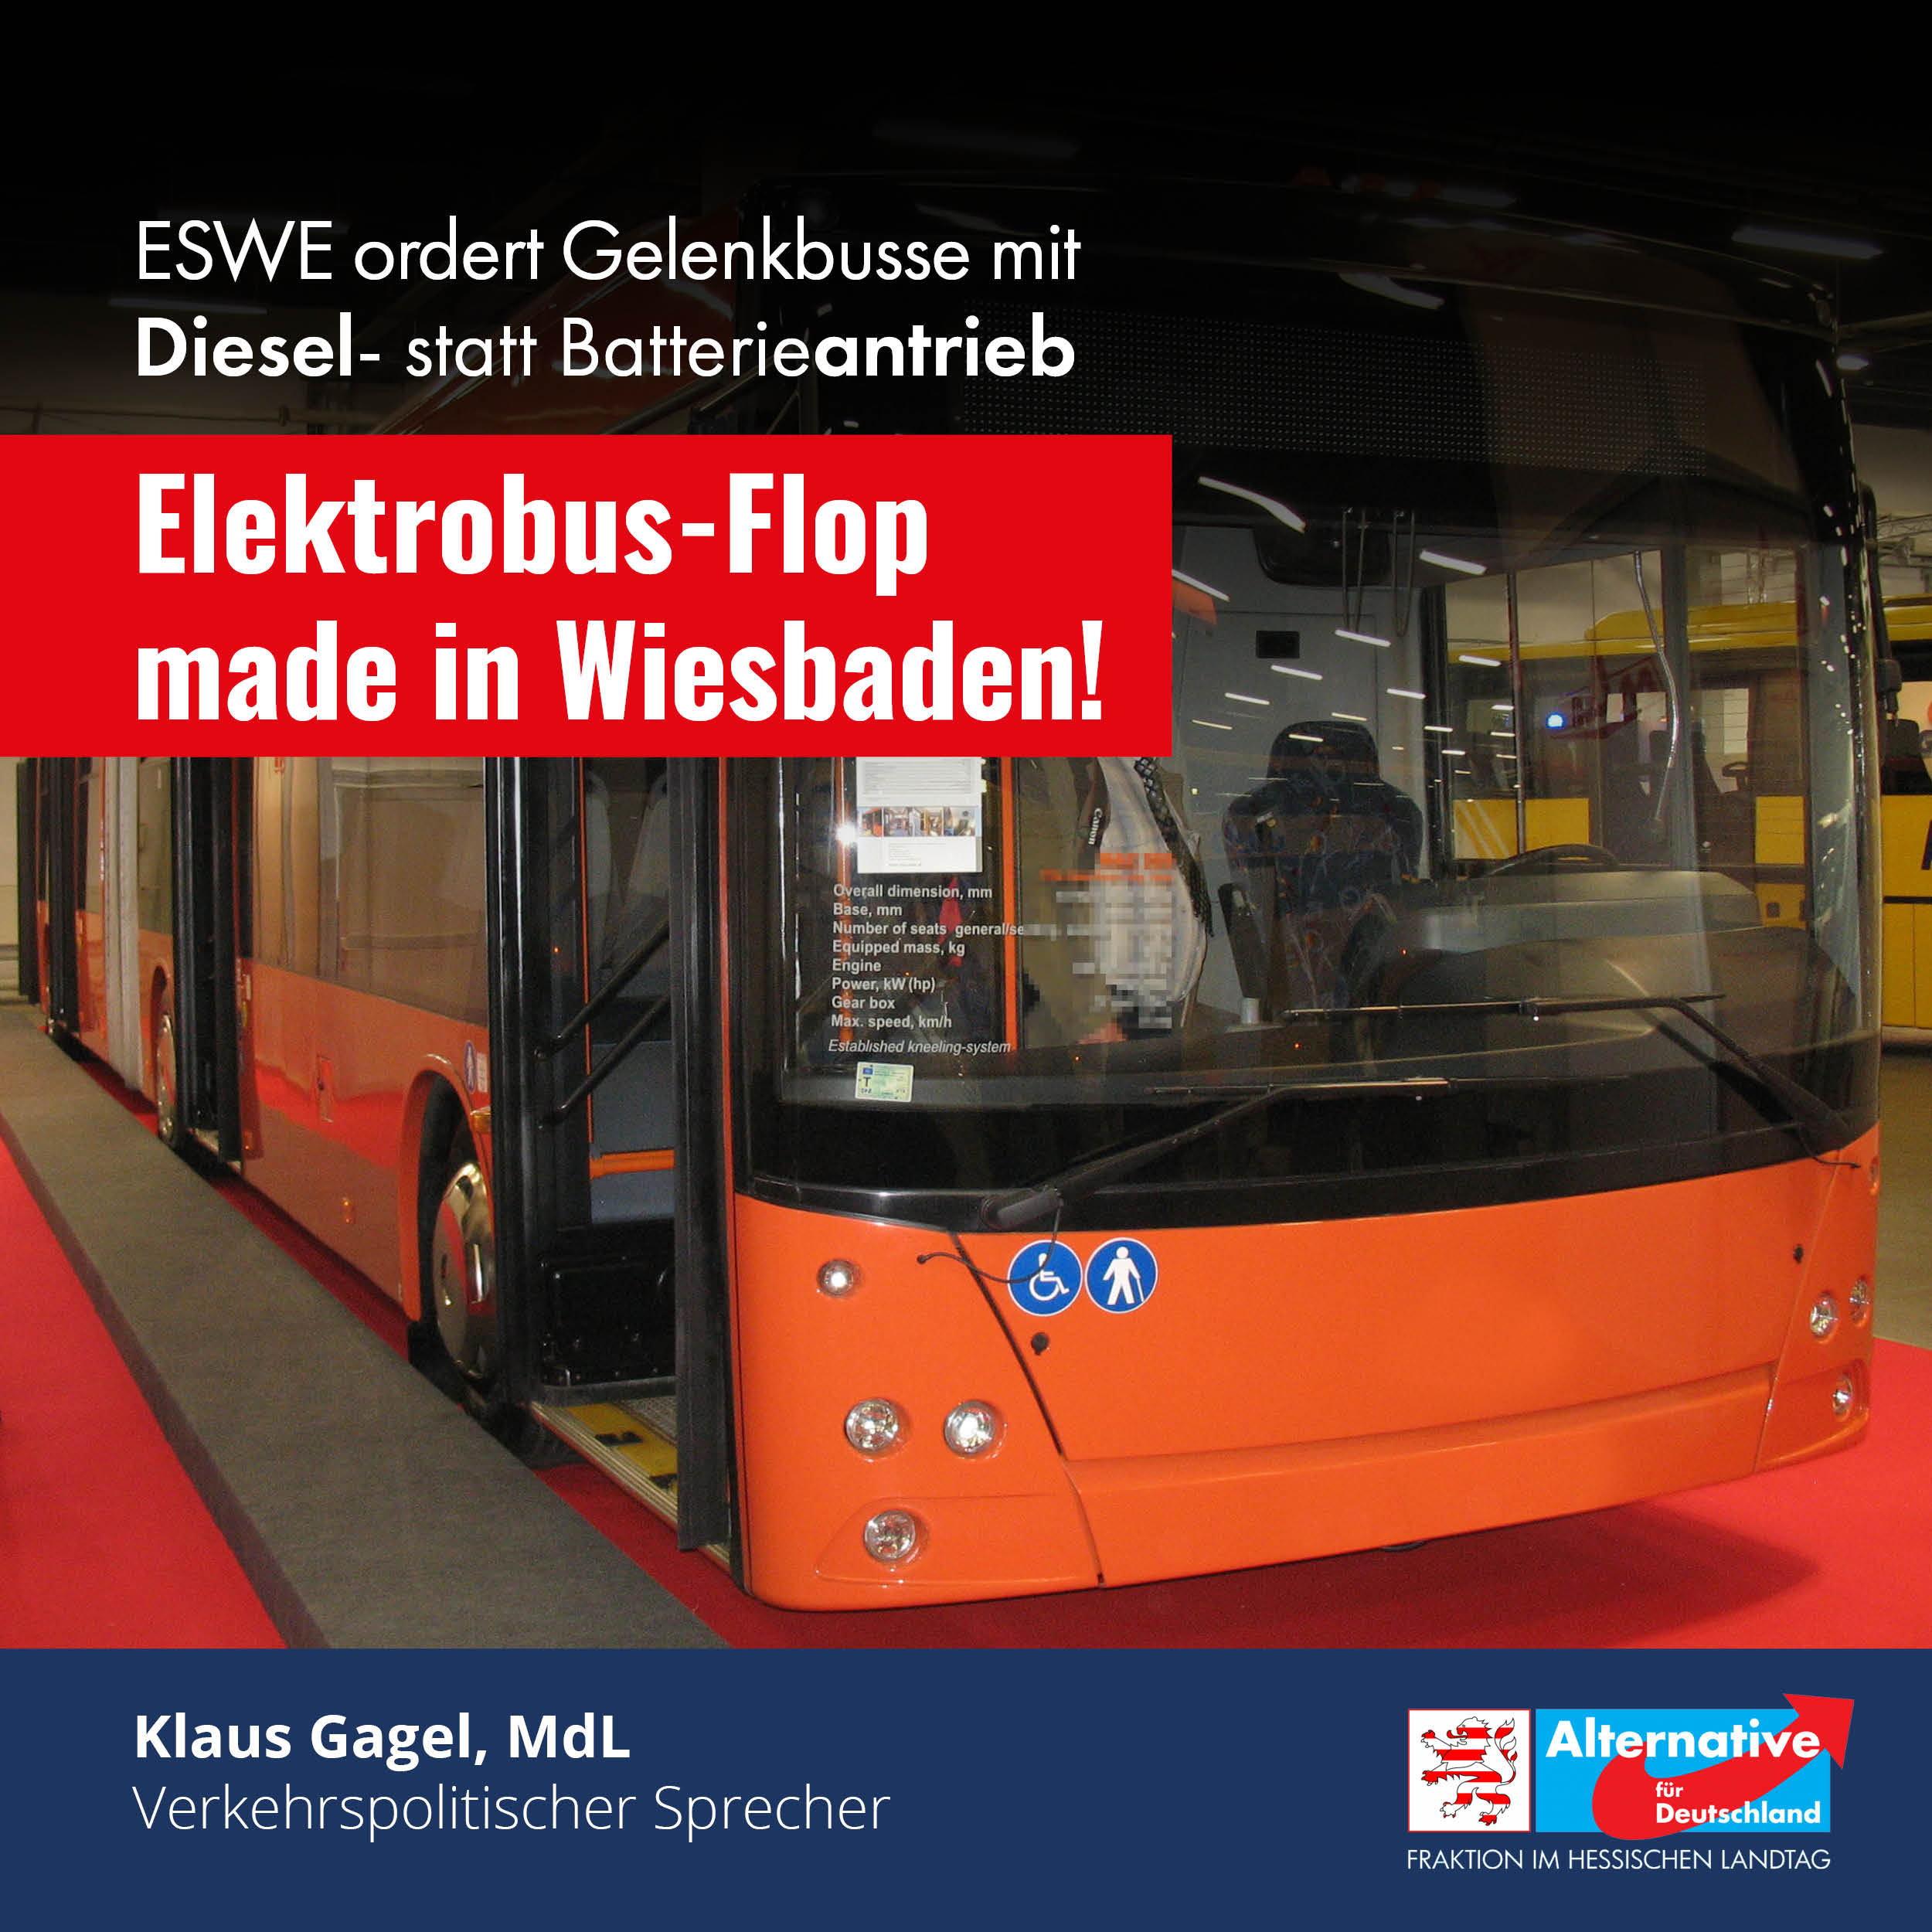 You are currently viewing Elektrobus-Flop made in Wiesbaden